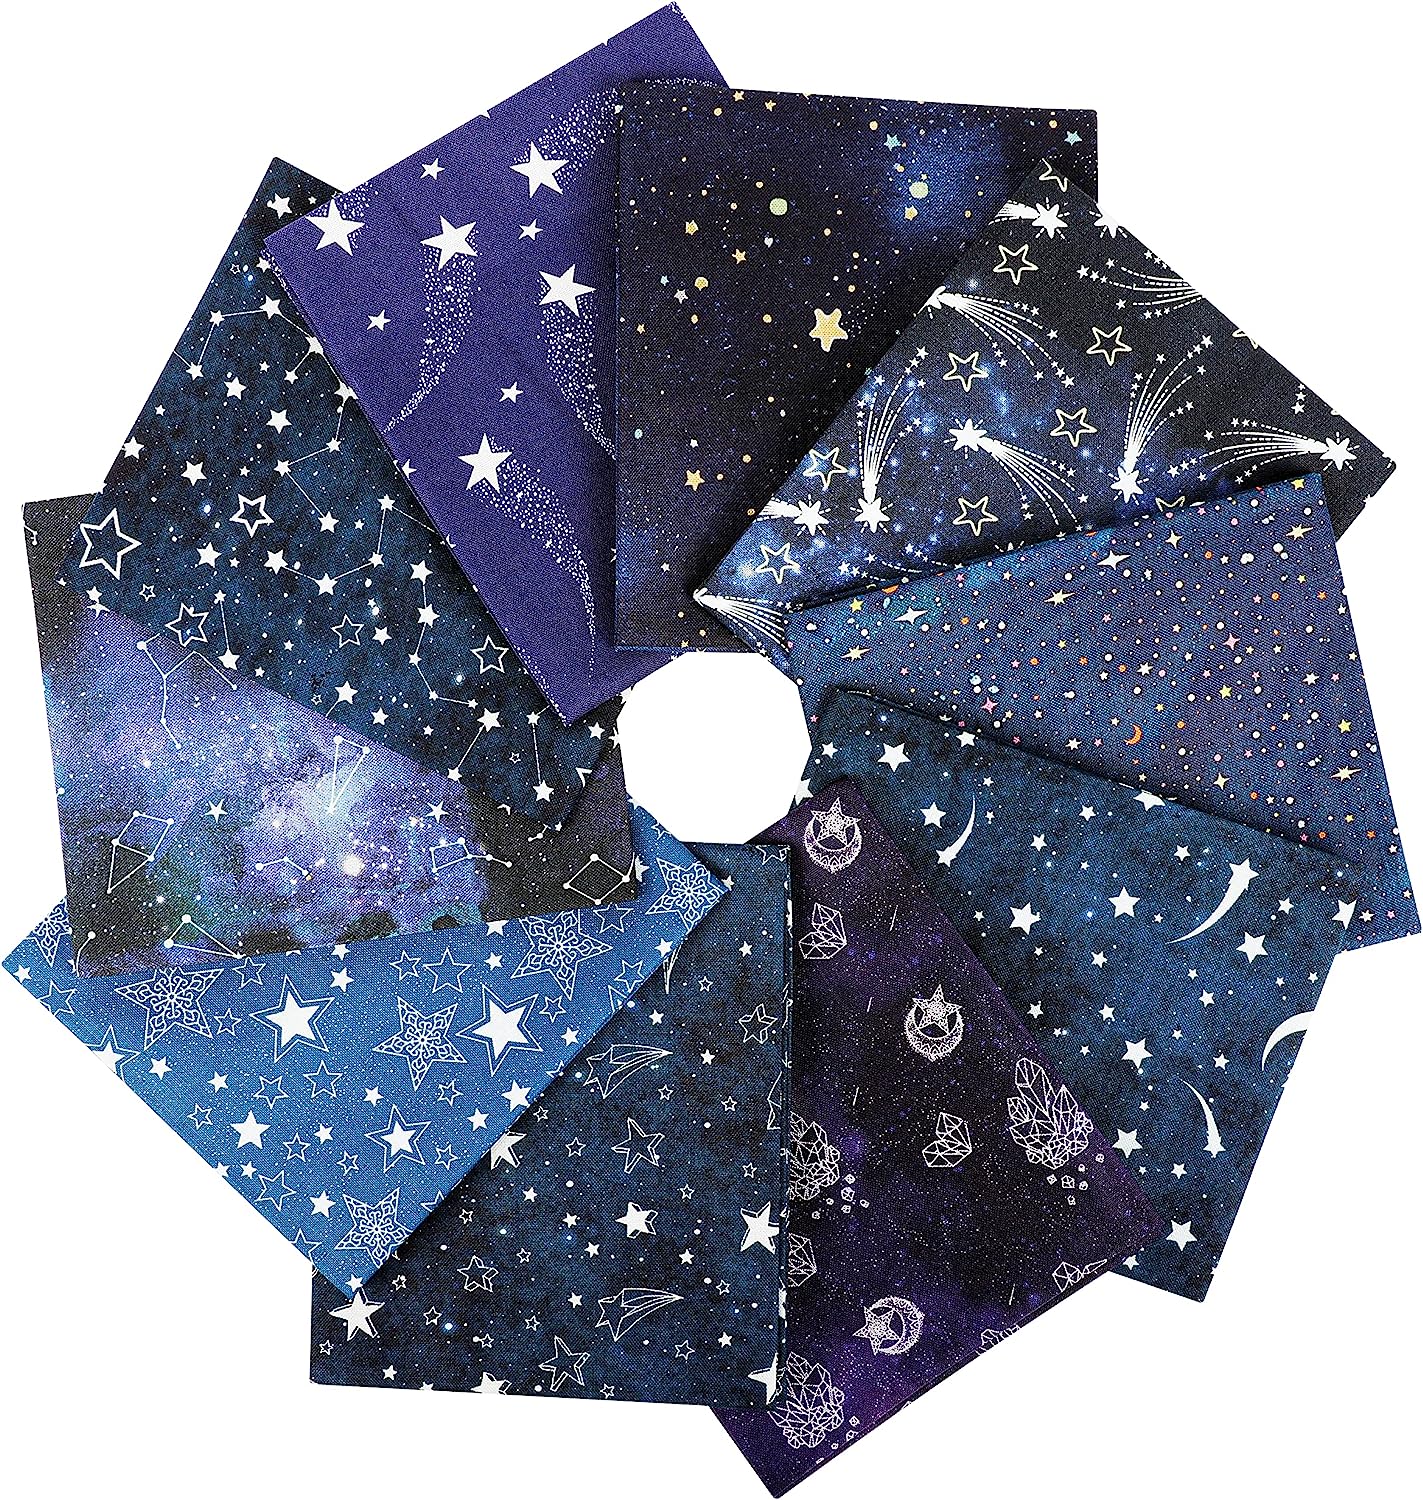  Hanjunzhao 100% Cotton Fat Quarters Fabric Bundles 18 x 22 inch  for Quilting Sewing Crafting (Universe Starry Sky)